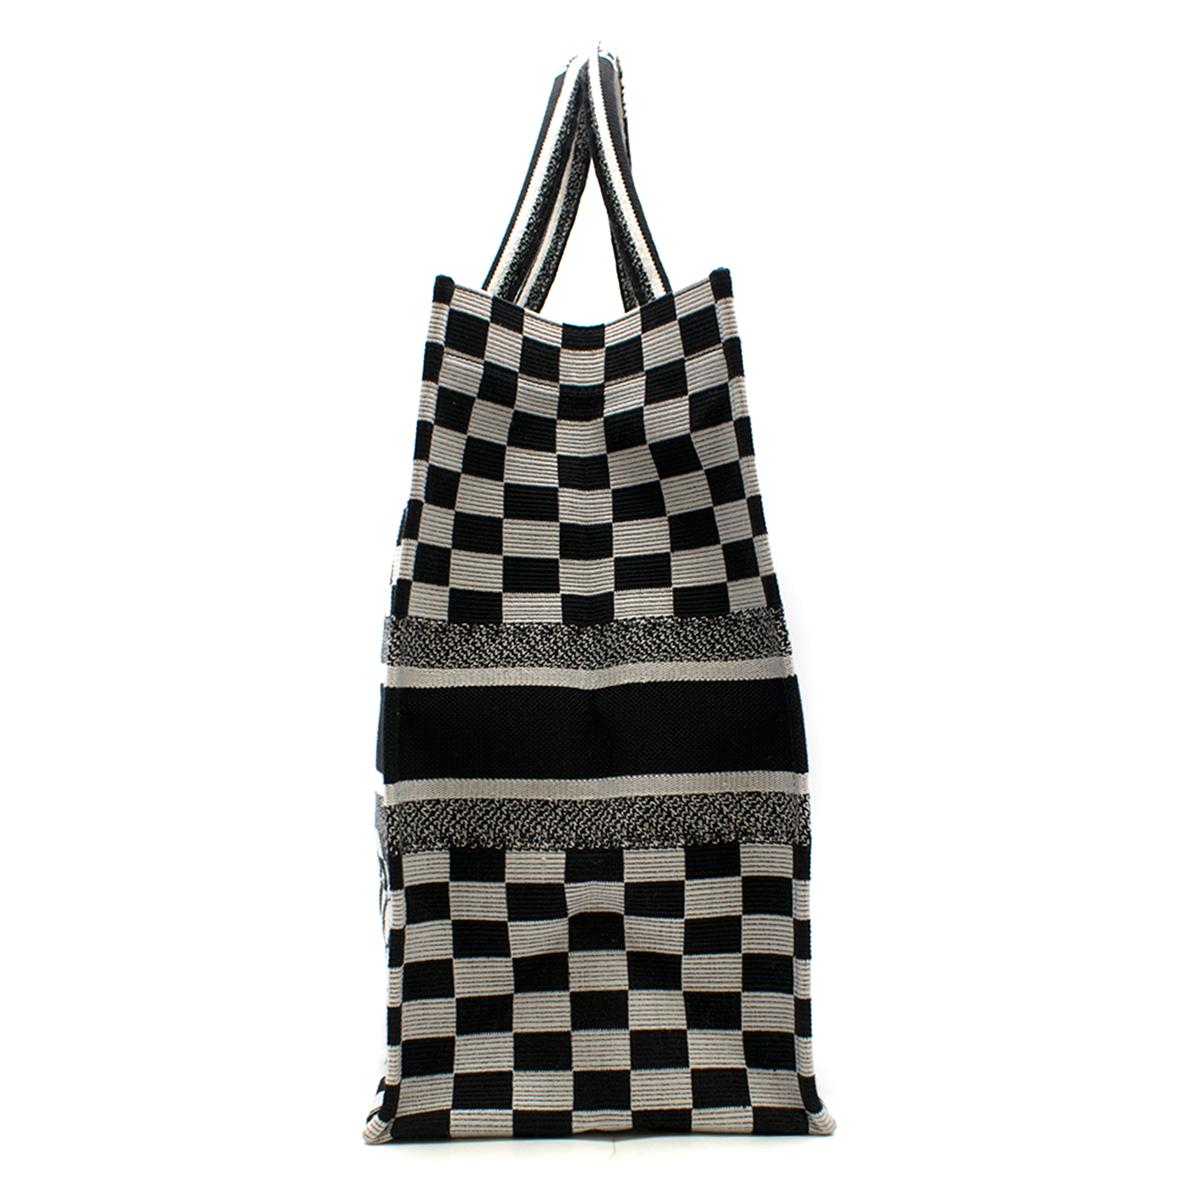 Dior Embroidered Canvas Book Tote Bag

- Black & white tote bag
- Gingham check embroidered canvas
- Lightweight
- Front 'Christian Dior Paris' embroidered
- Rolled top handles with 'Christian Dior' embroidered
- Internal large compartment
- This